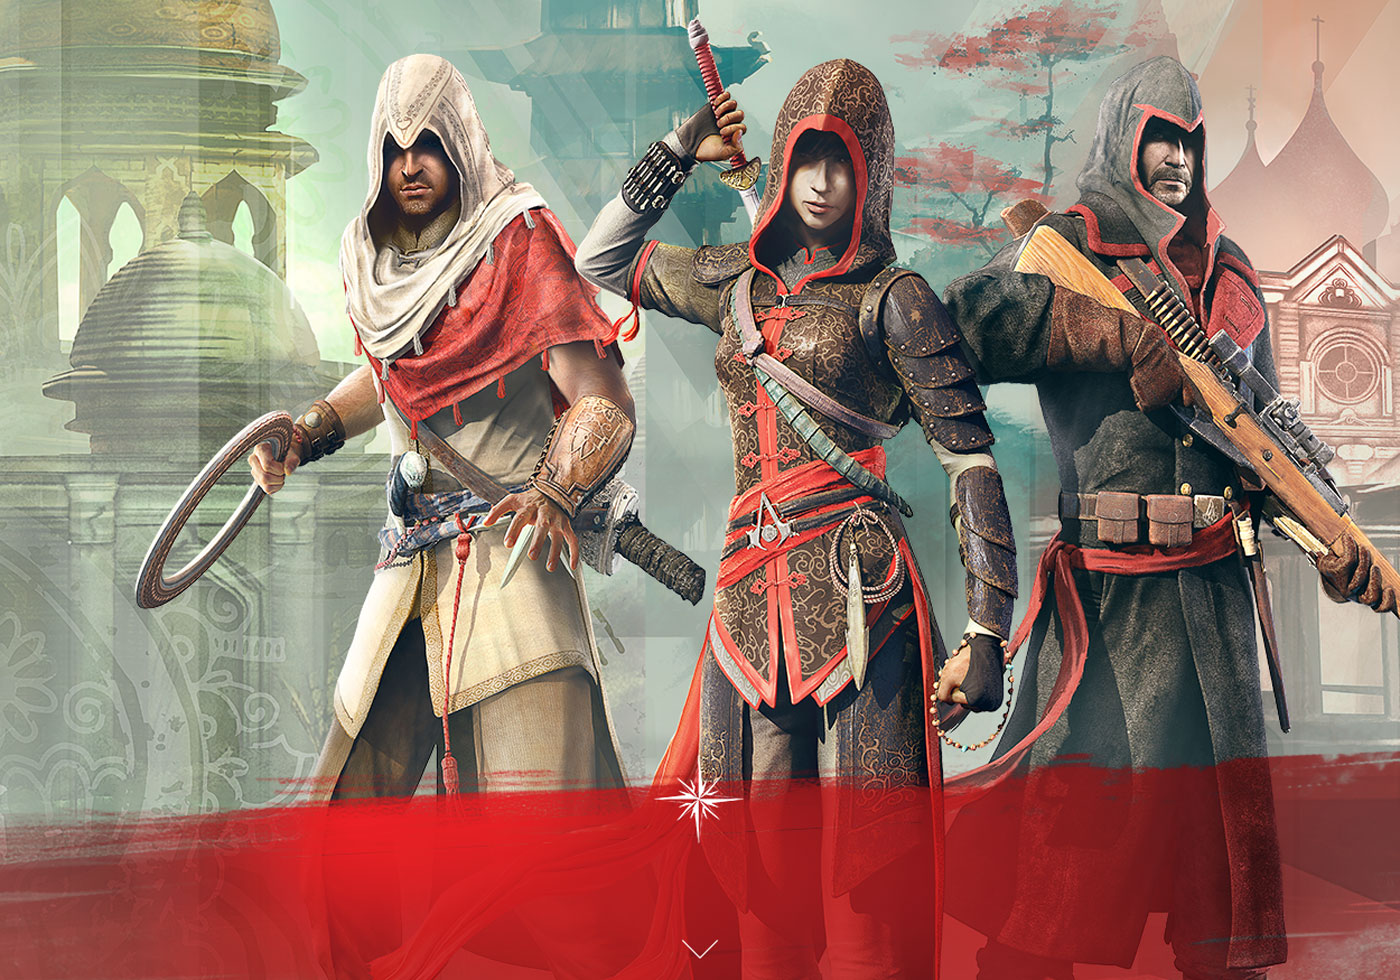 Media asset in full size related to 3dfxzone.it news item entitled as follows: Ubisoft annuncia la trilogia di game Assassin's Creed Chronicles | Image Name: news22424_Assassin-s-Creed-Chronicles_1.jpg